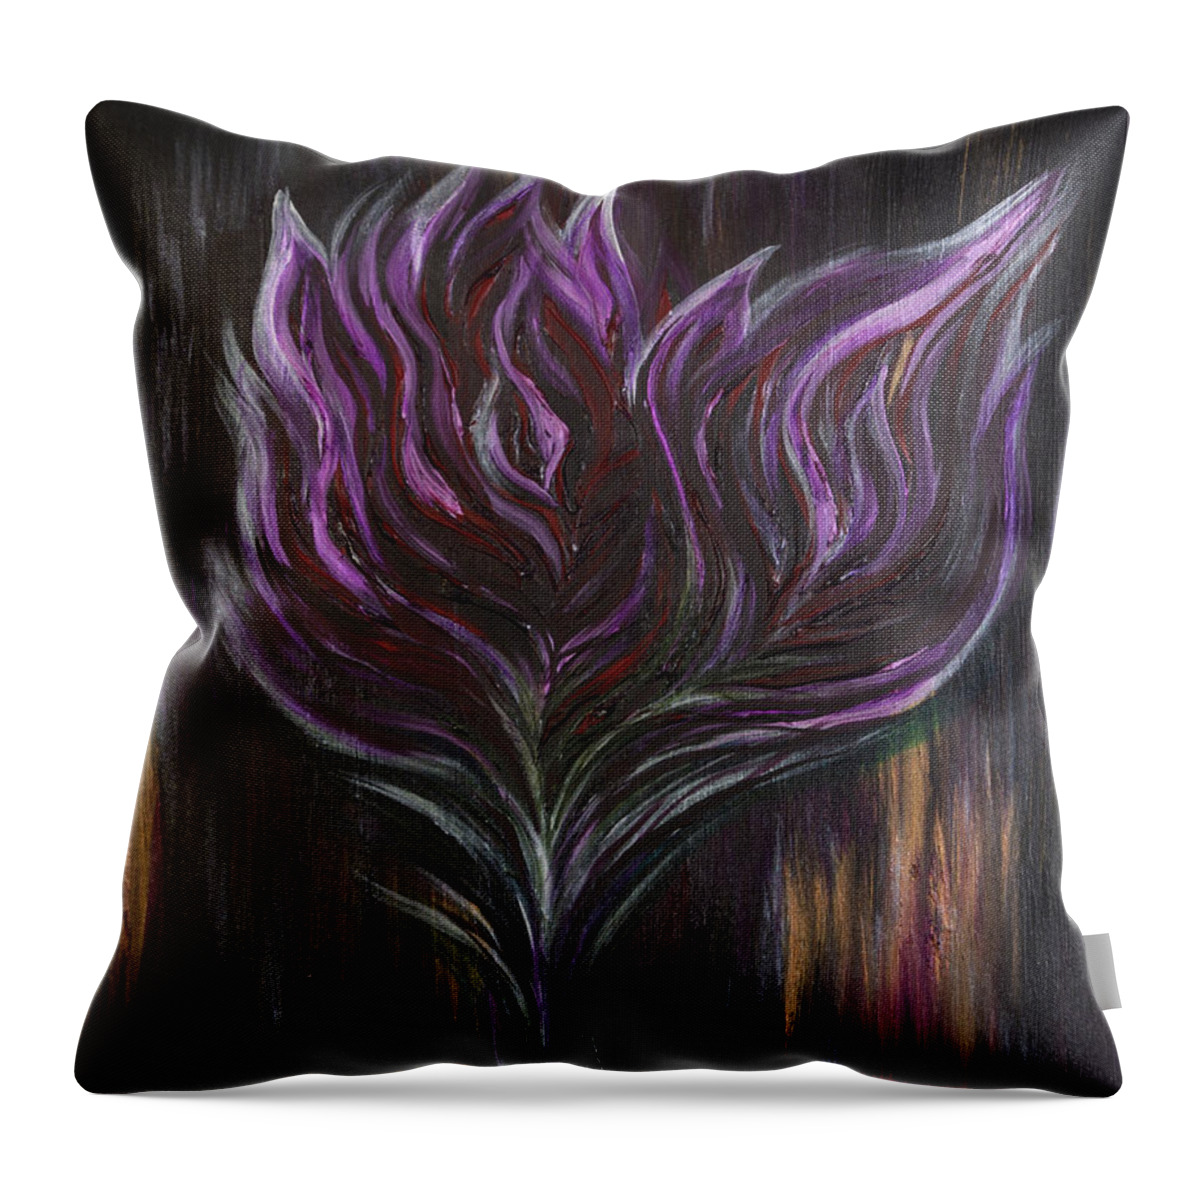 Abstract Throw Pillow featuring the painting Abstract Dark Rose by Michelle Pier